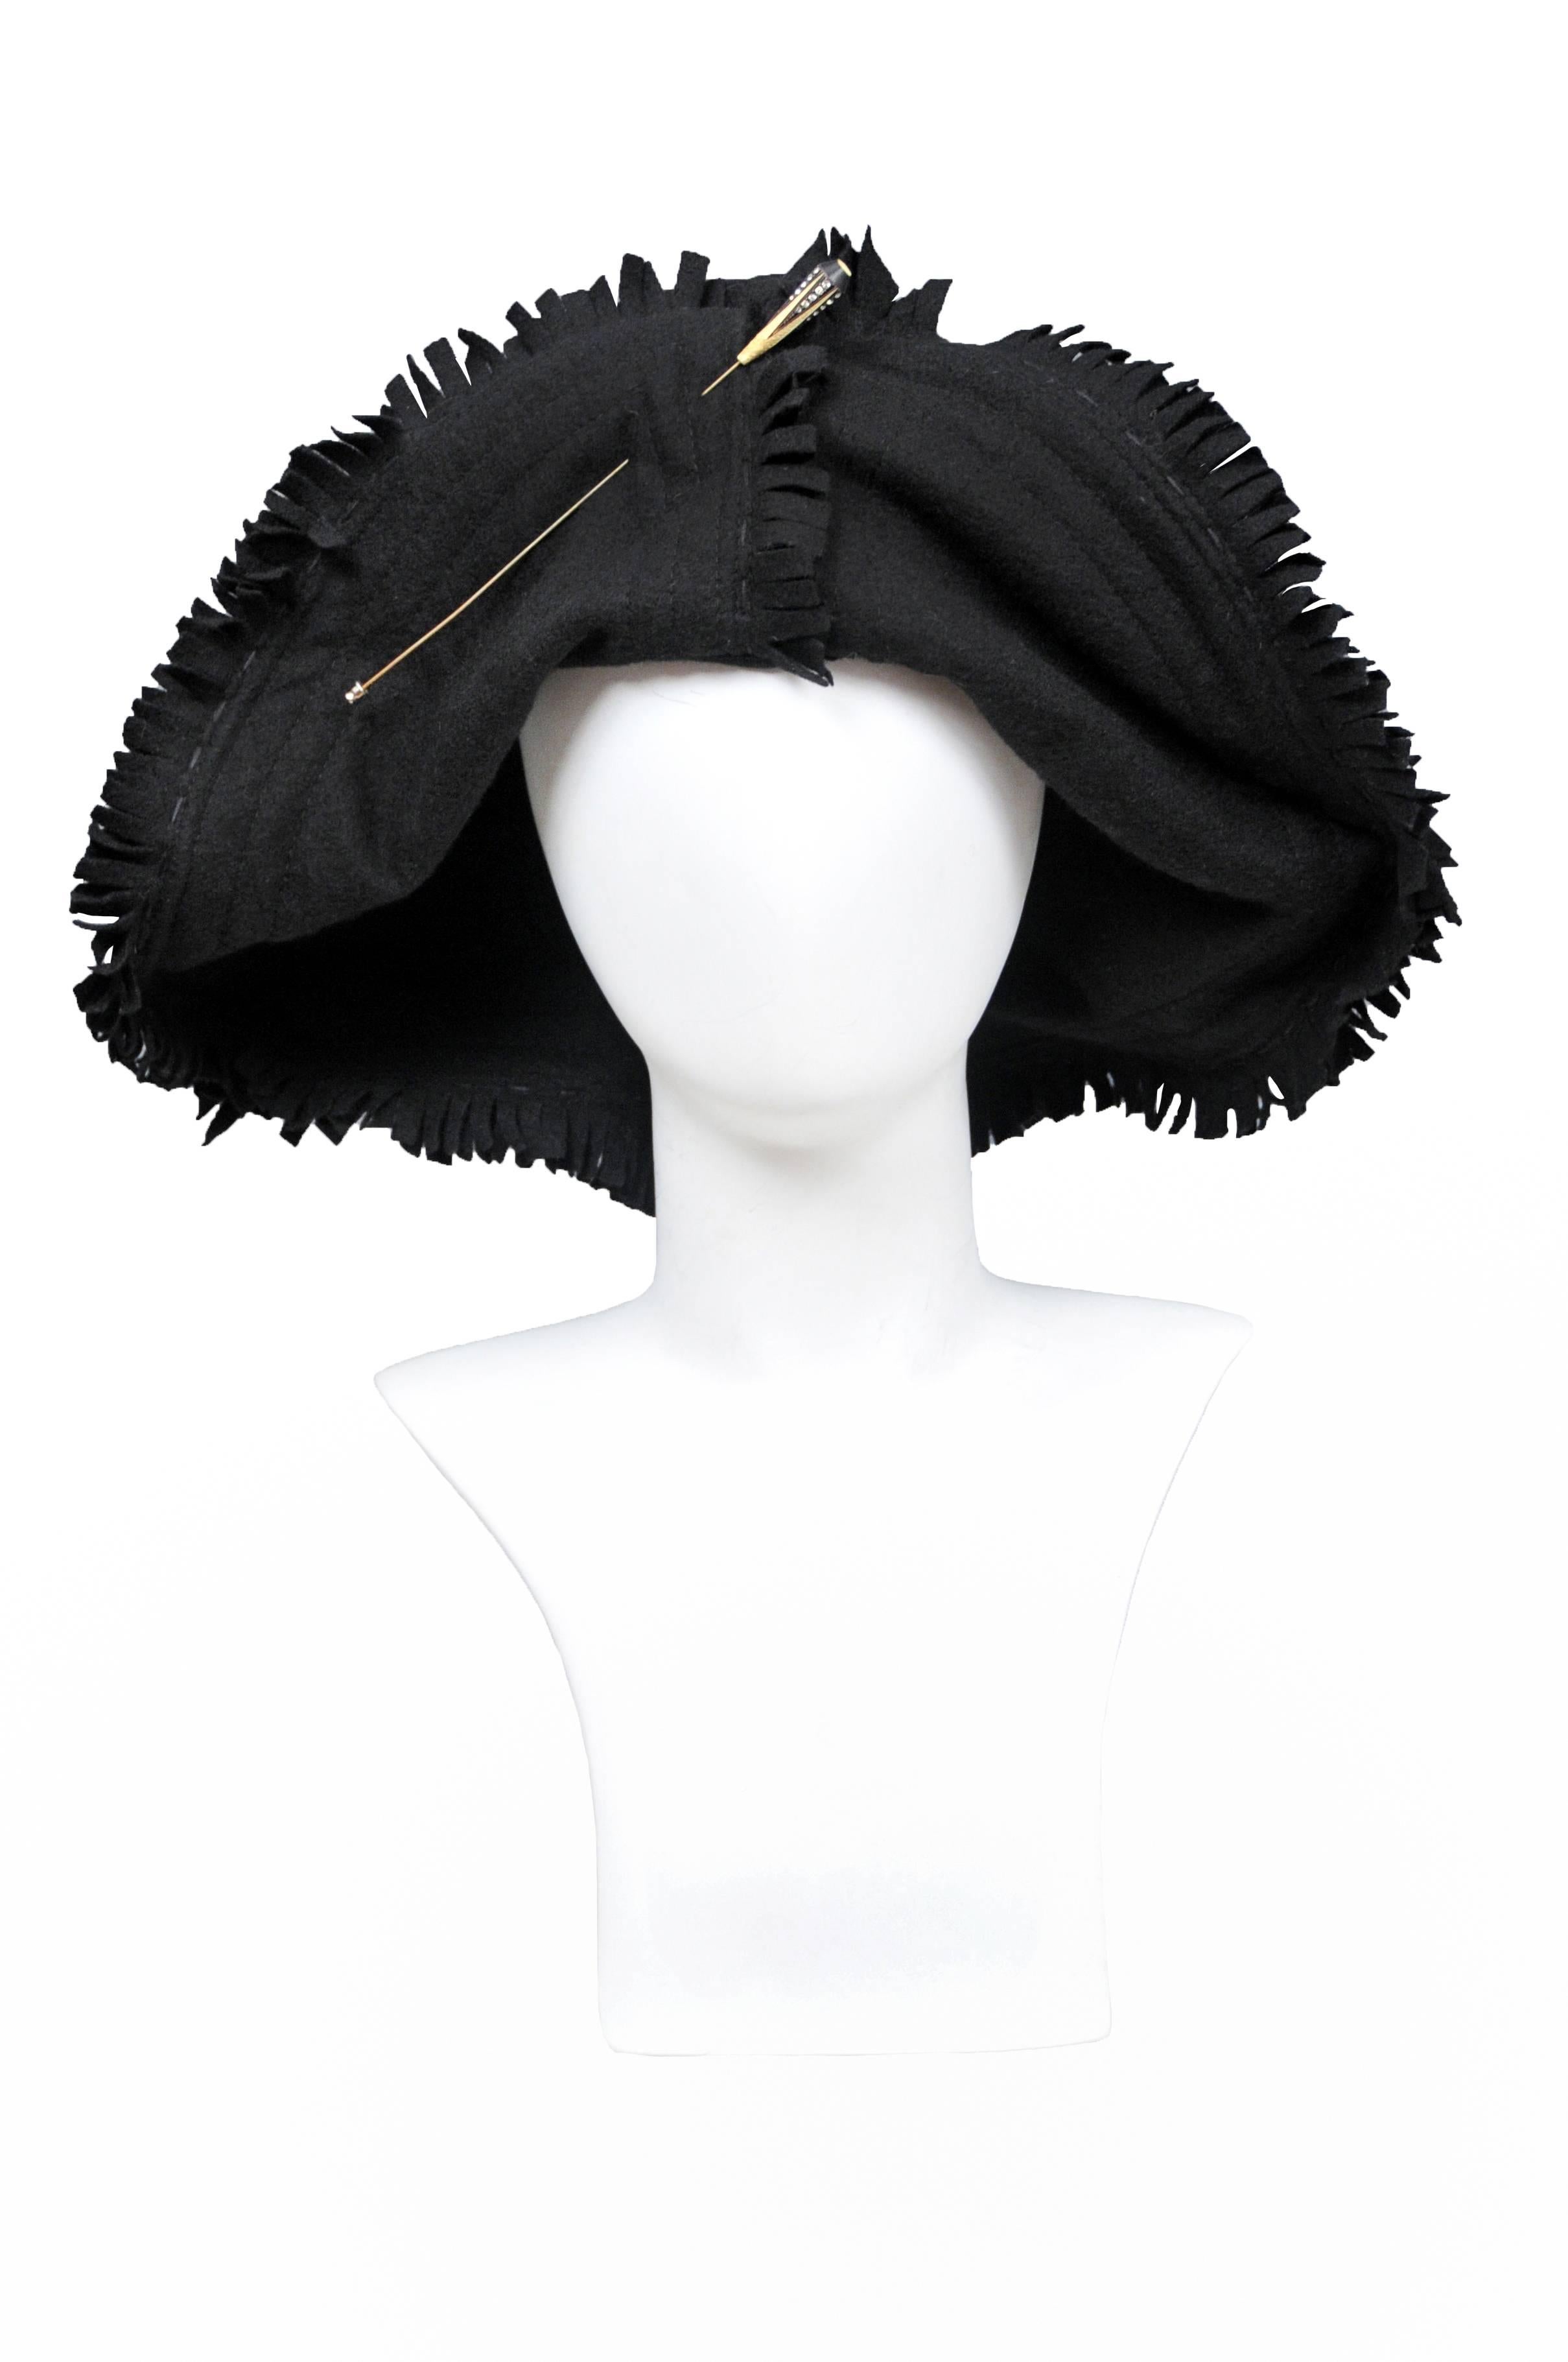 Vintage Junya Watanabe black wool hat featuring intentional frayed edges and adorned with a vintage hat pin at the center front.
Please inquire for additional images.